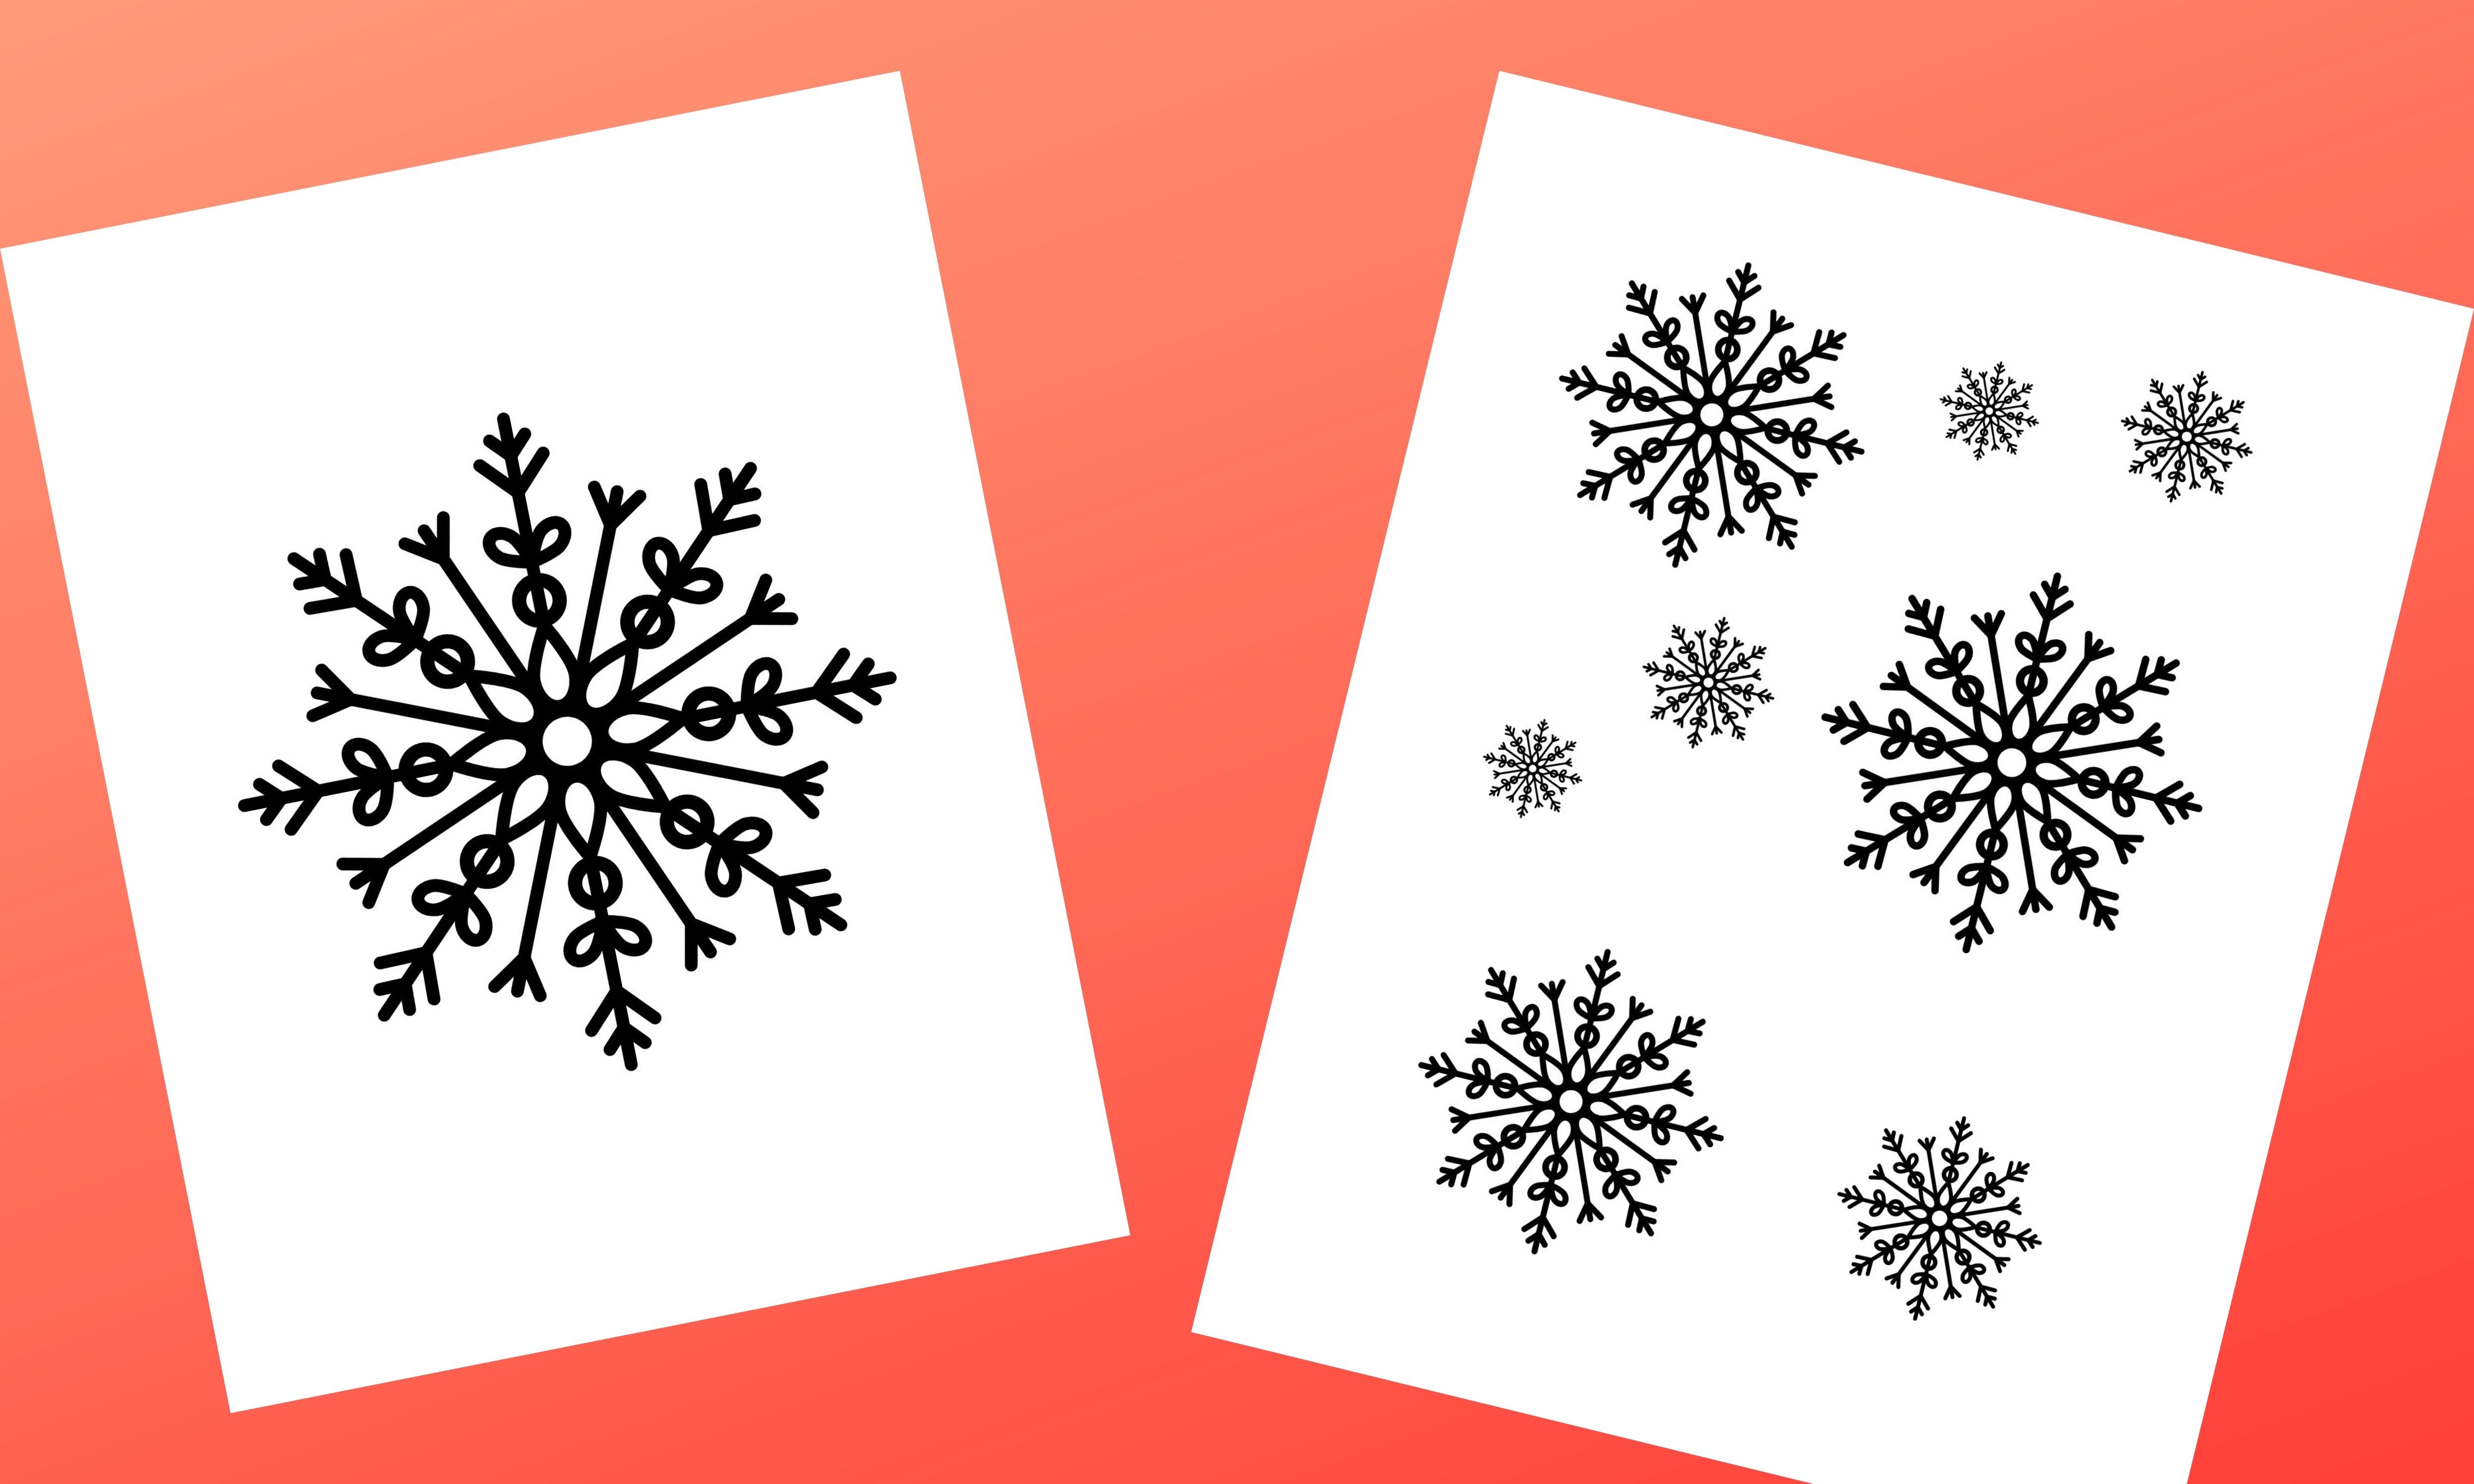 large and small, black and white, modern paper snowflakes